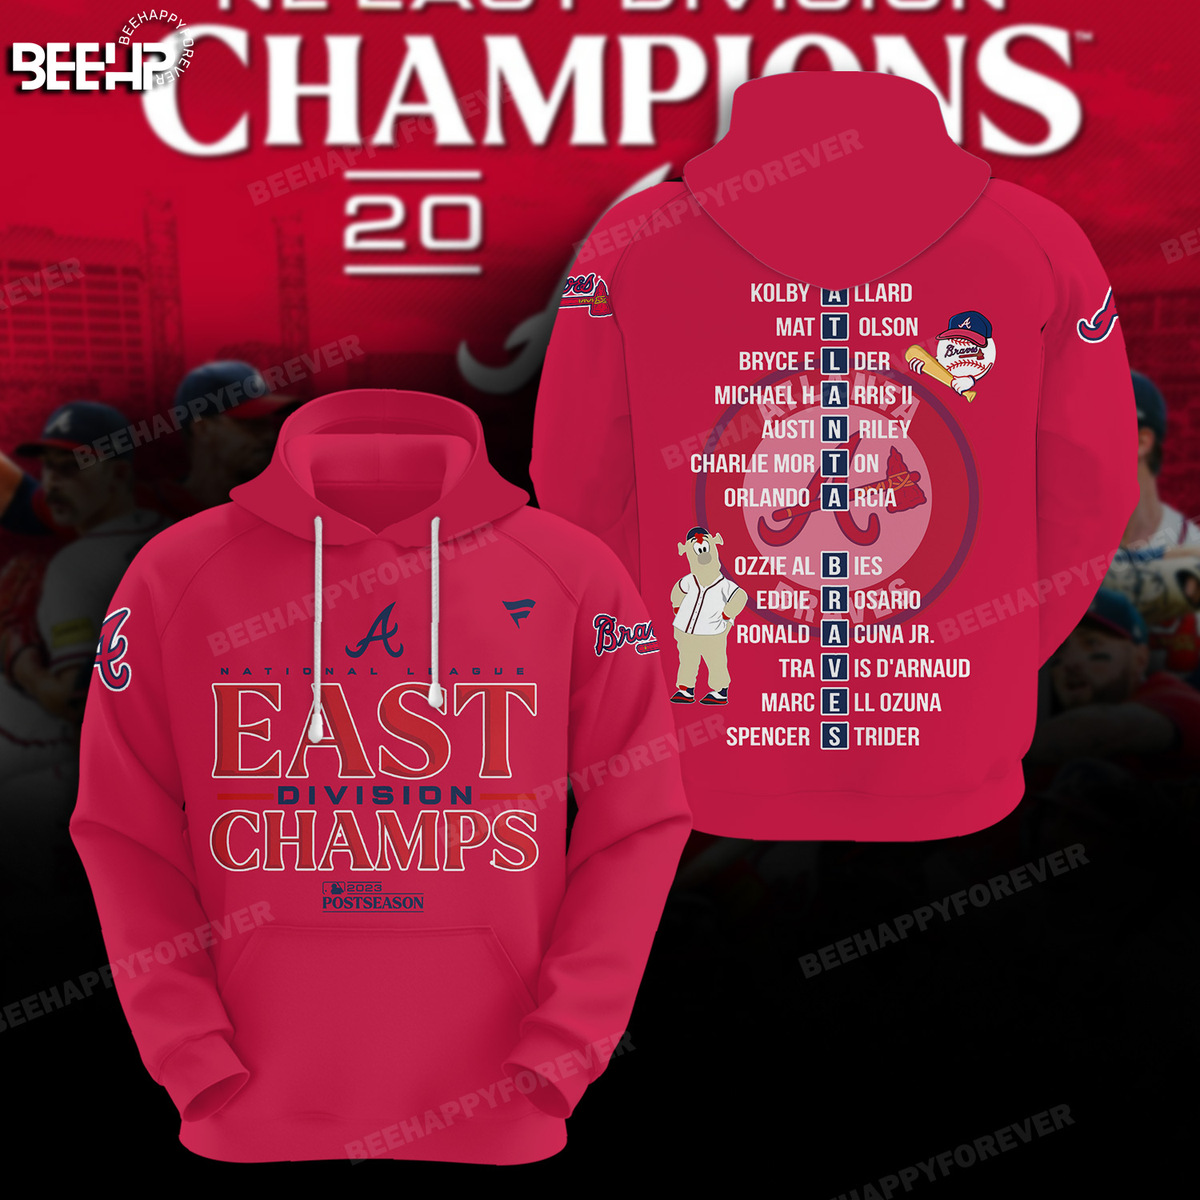 The East Is Ours Atlanta Braves Baseball 2022 NL East Division Champions  shirt, hoodie, sweatshirt and tank top